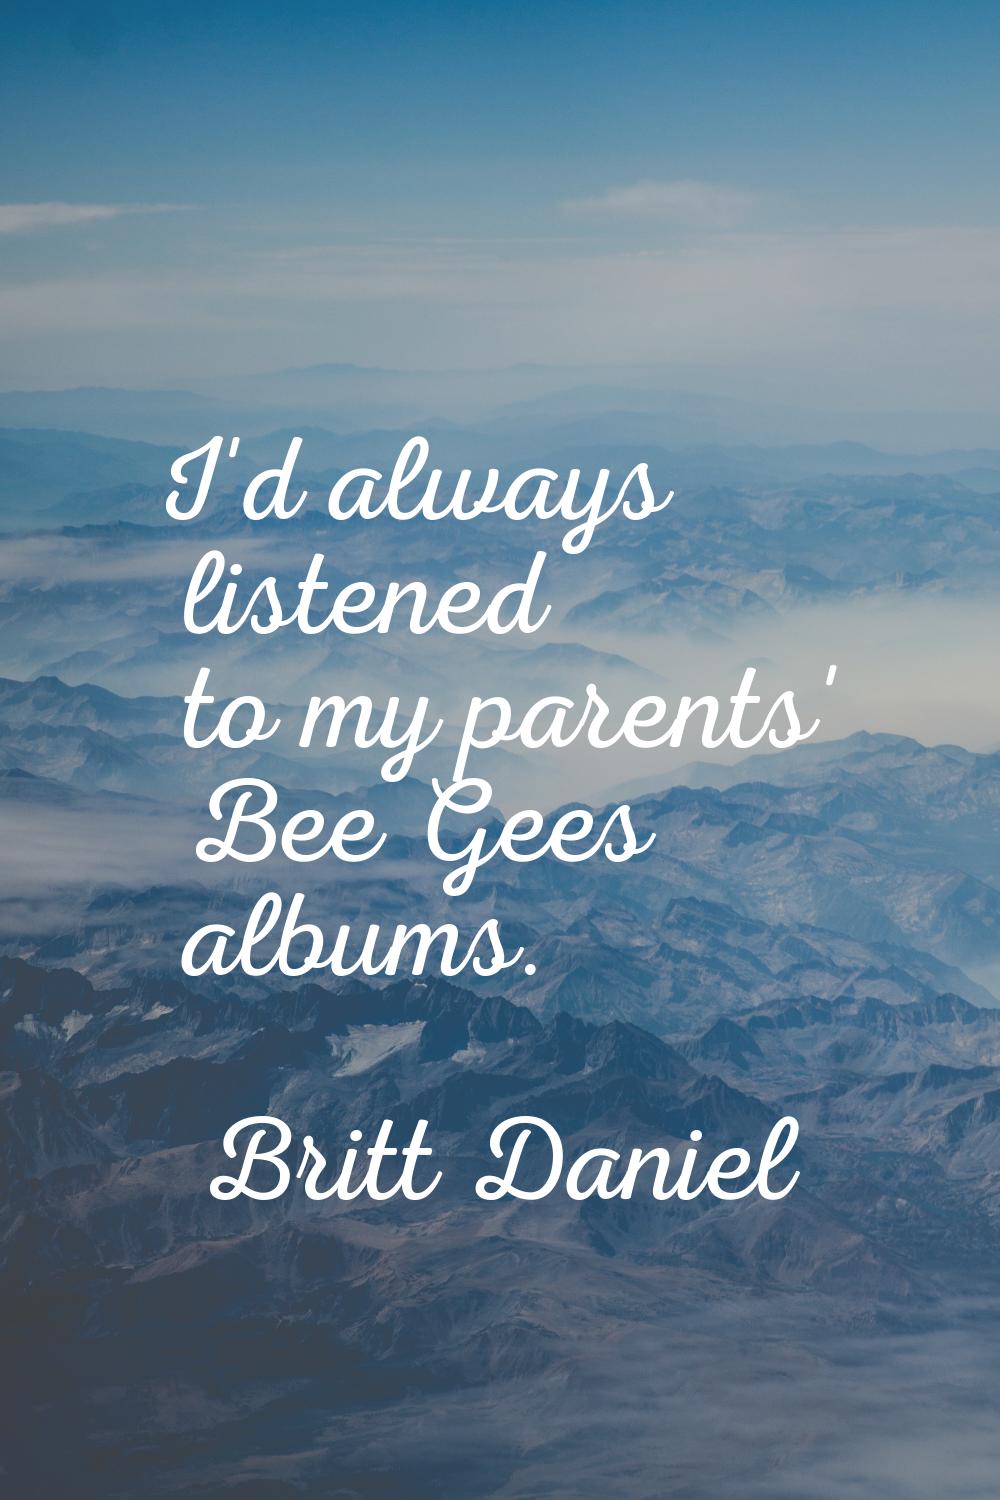 I'd always listened to my parents' Bee Gees albums.